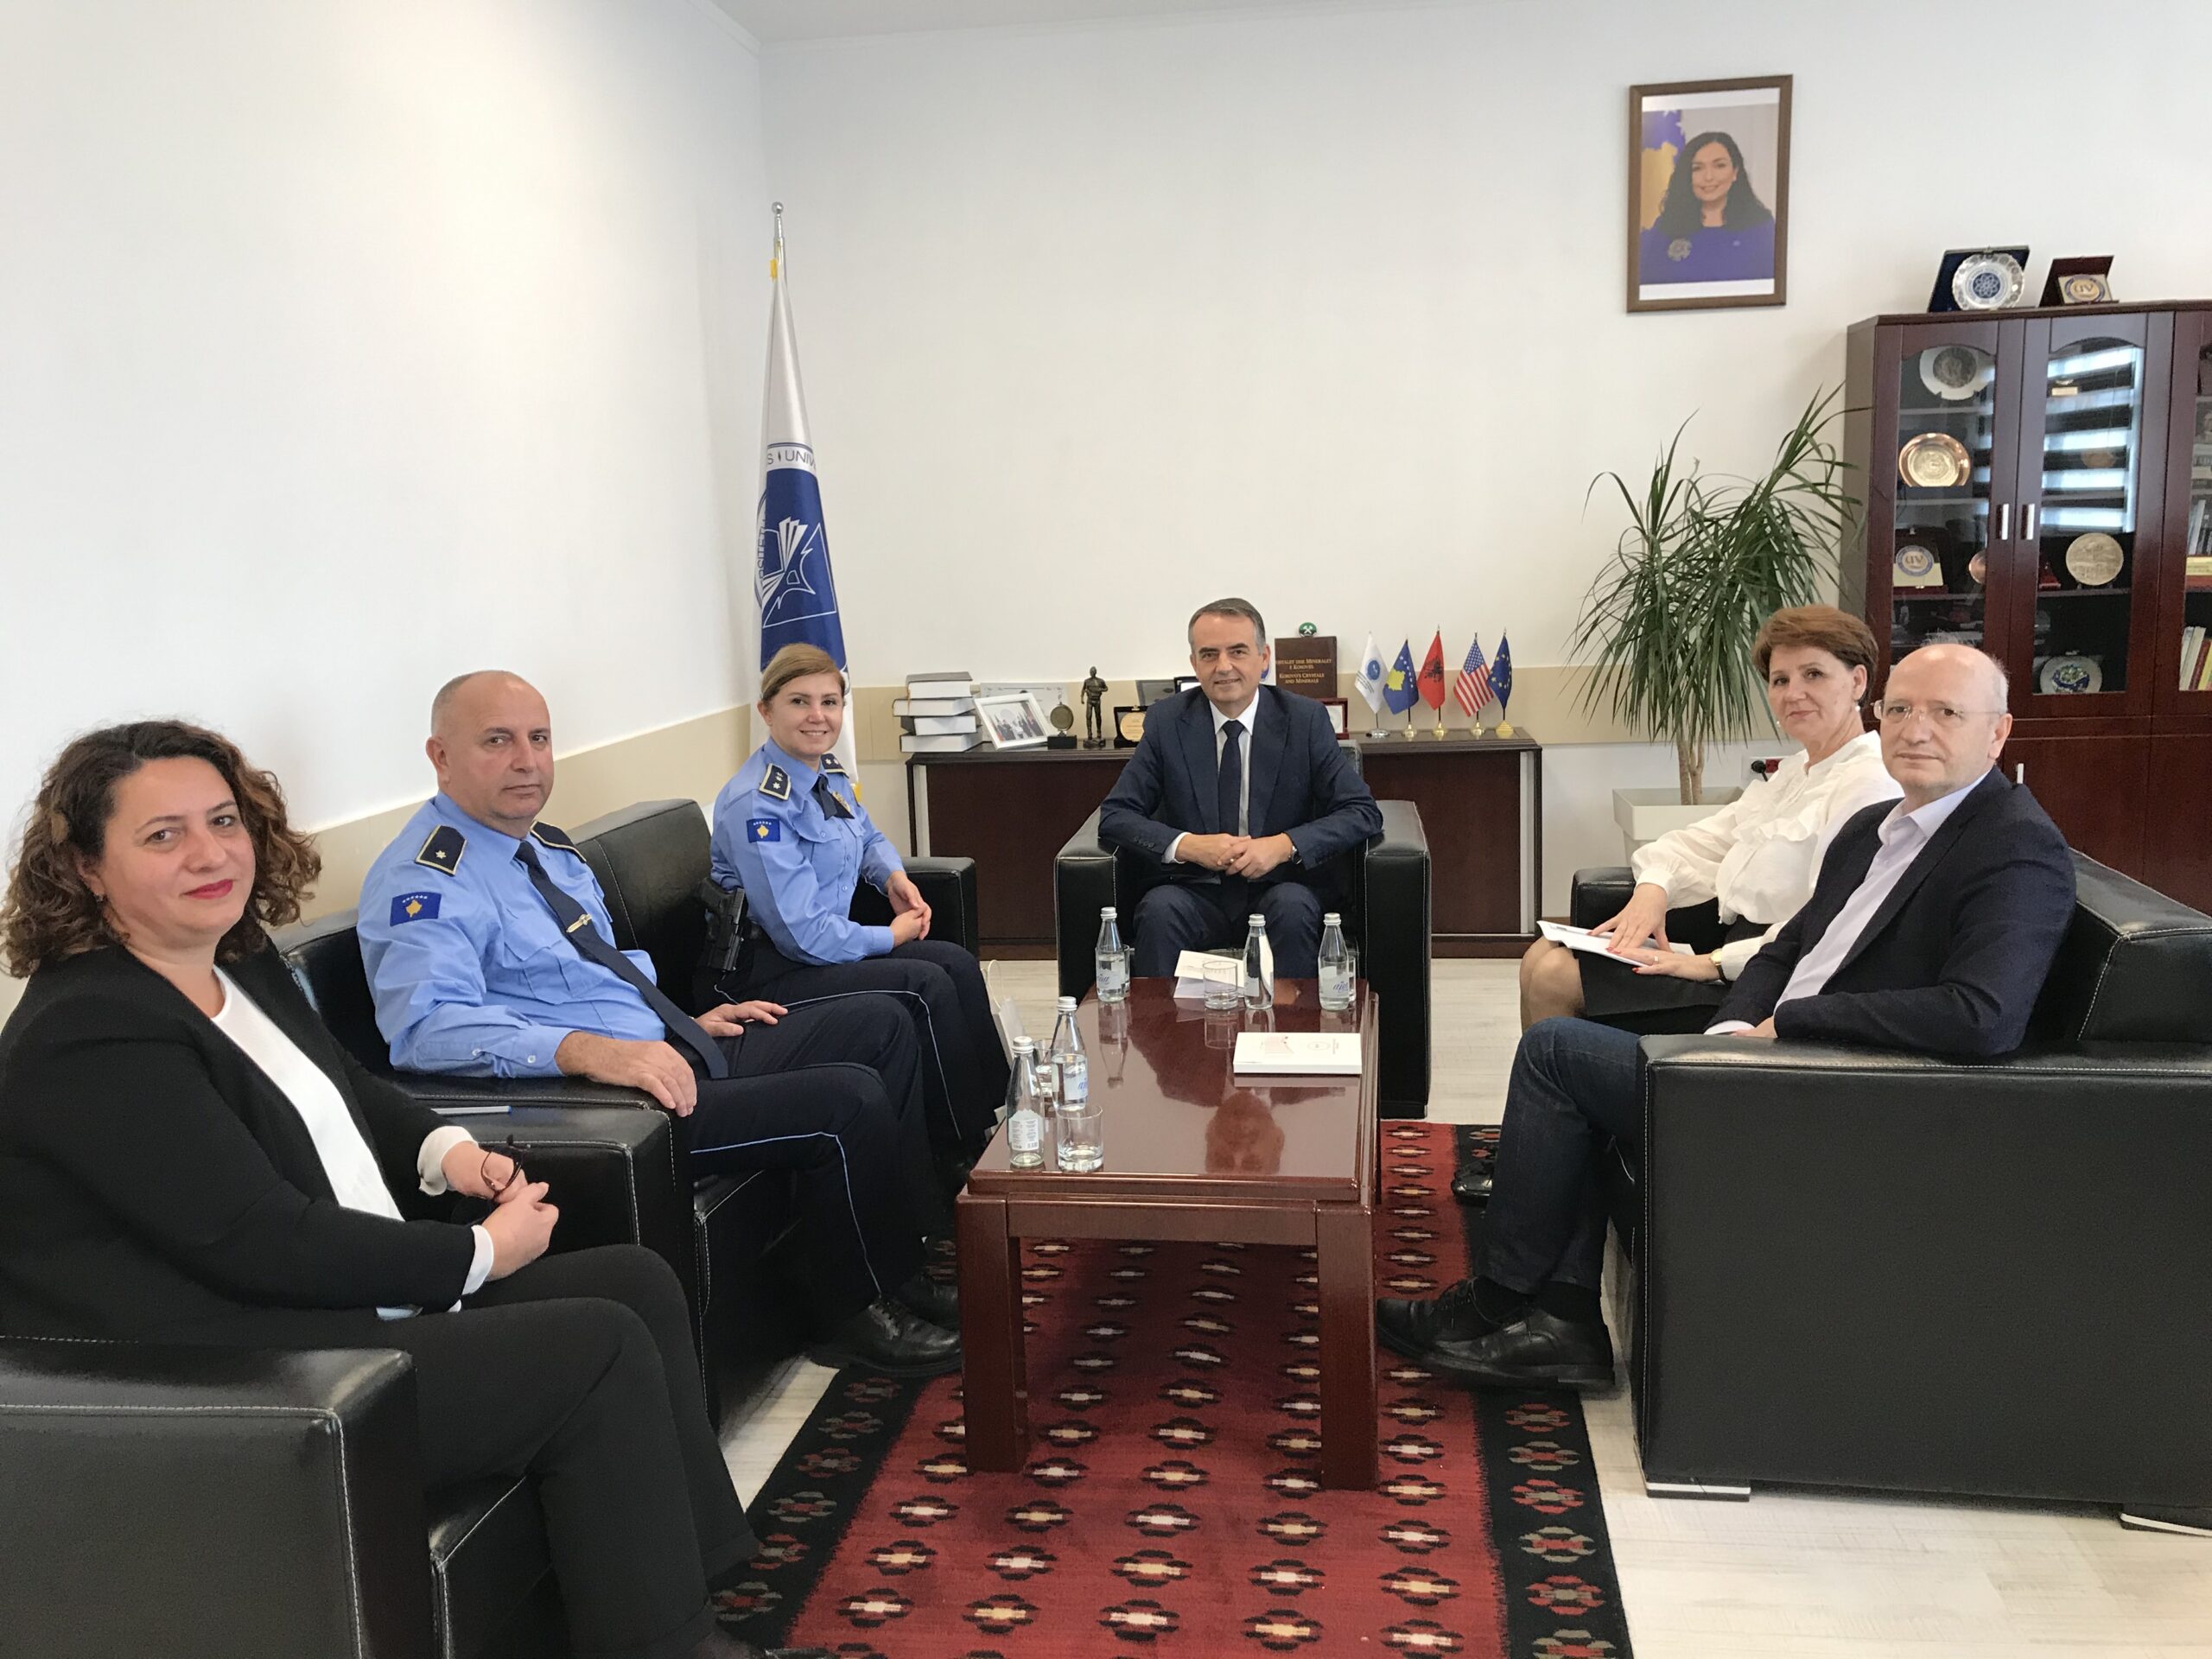 The Regional Director Of The Kosovo Police In Mitrovica, Afërdita Mikullovci, Together With The Police Commander Of The South Station, Ahmet Xhosha, Were Received In A Meeting By The Rector Of UIBM, Prof. Dr. Alush Musaj